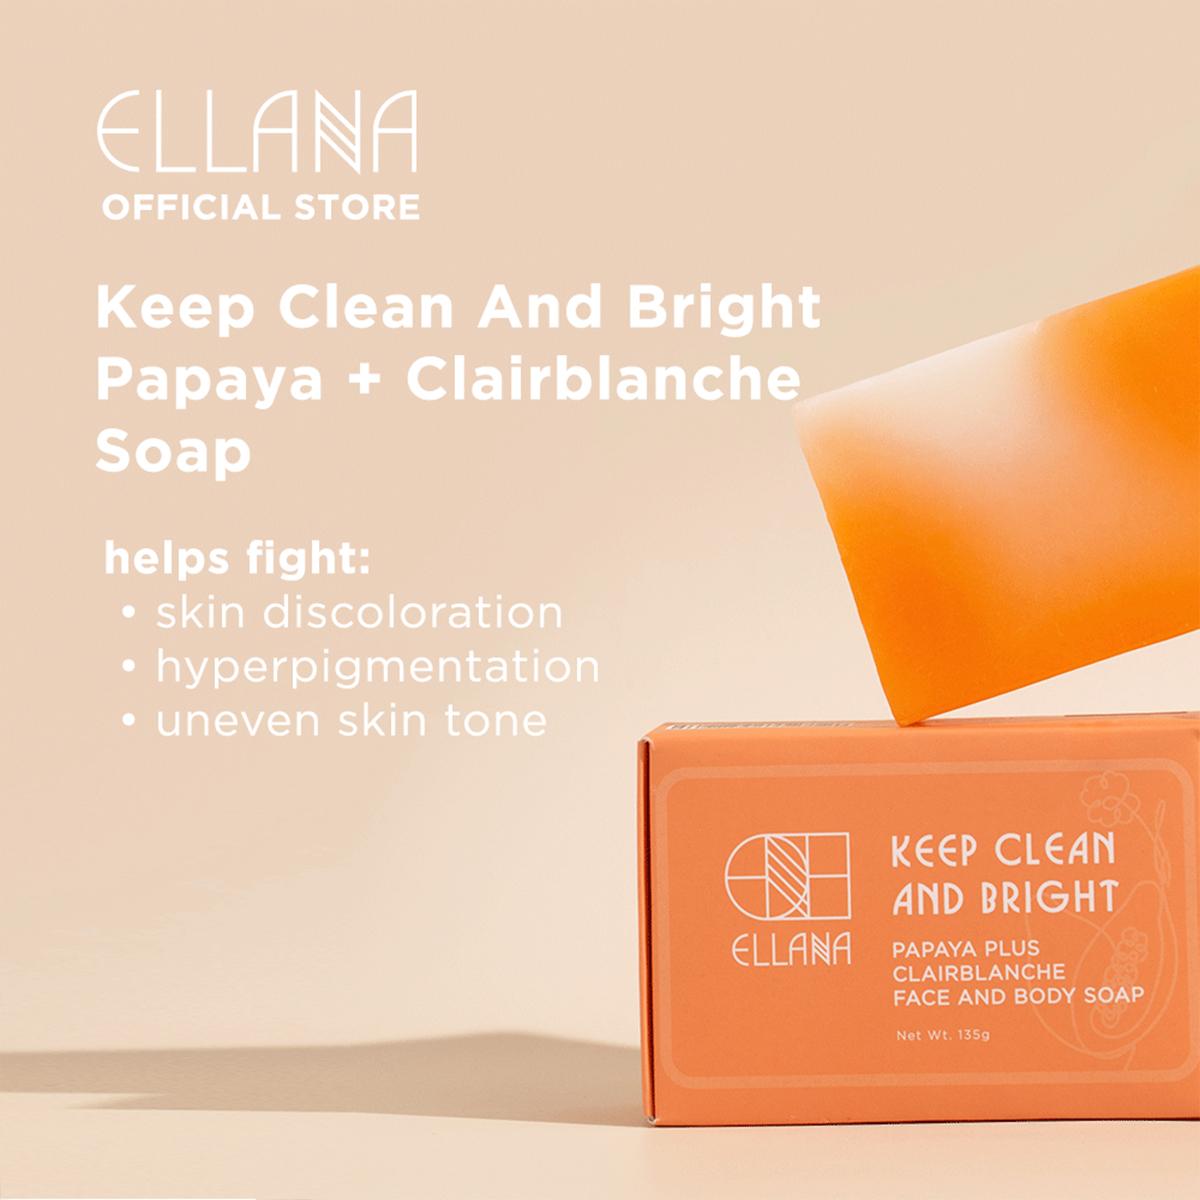 Keep Clean and Bright Papaya + Clairblanche Face and Body Soap | For Skin Brightening & Uneven Skin Tone